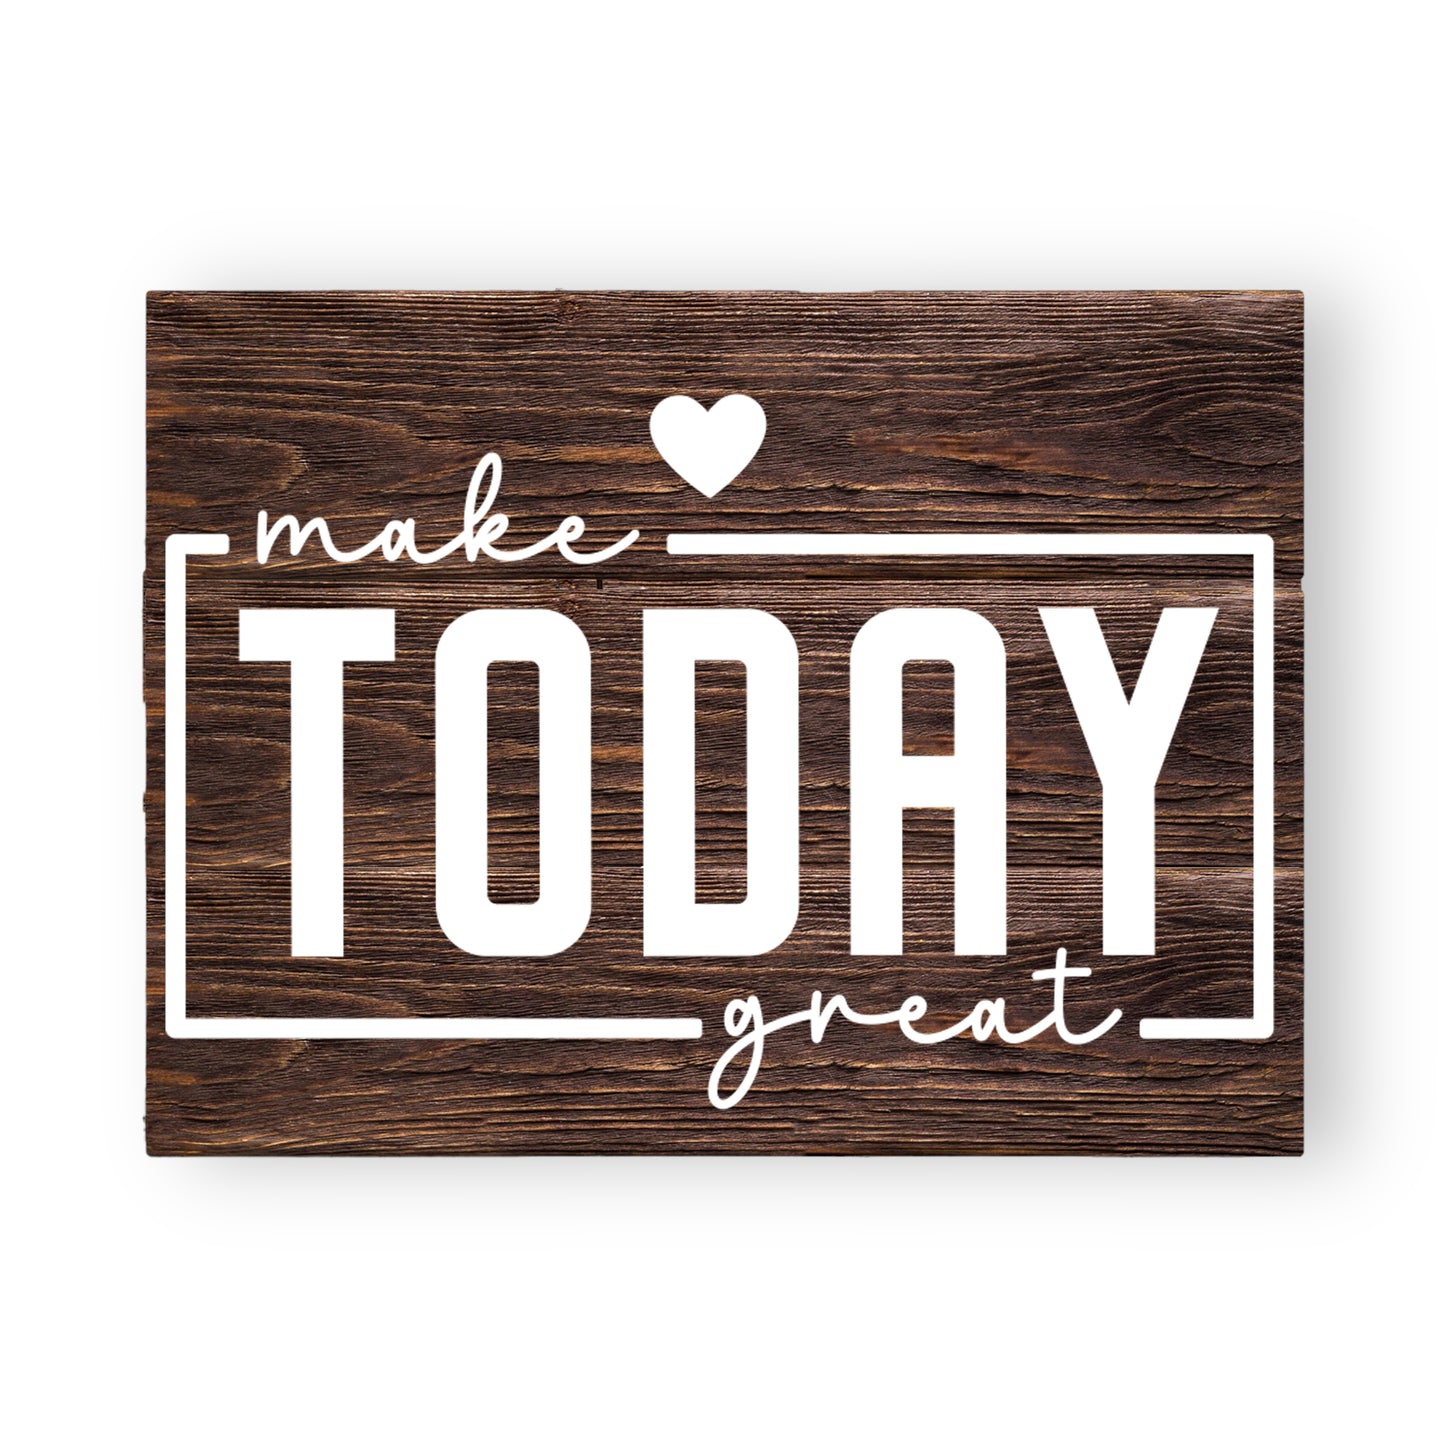 Positive Vibes: 11x14 "Make Today Great" Printed Wood Sign